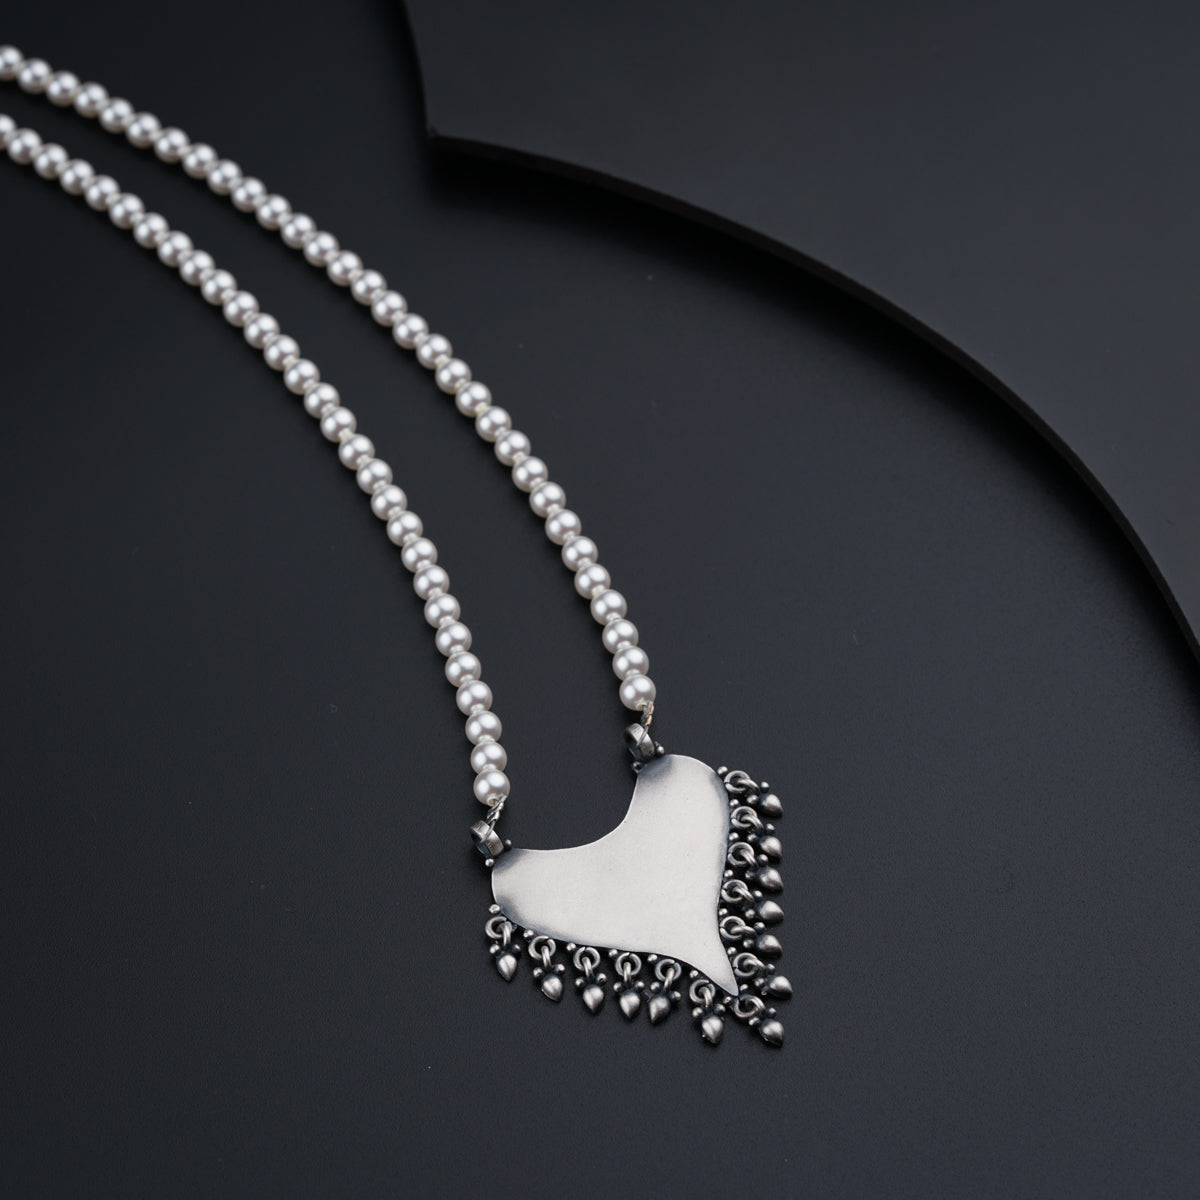 Ambition Pendant Necklace with High Quality Pearls